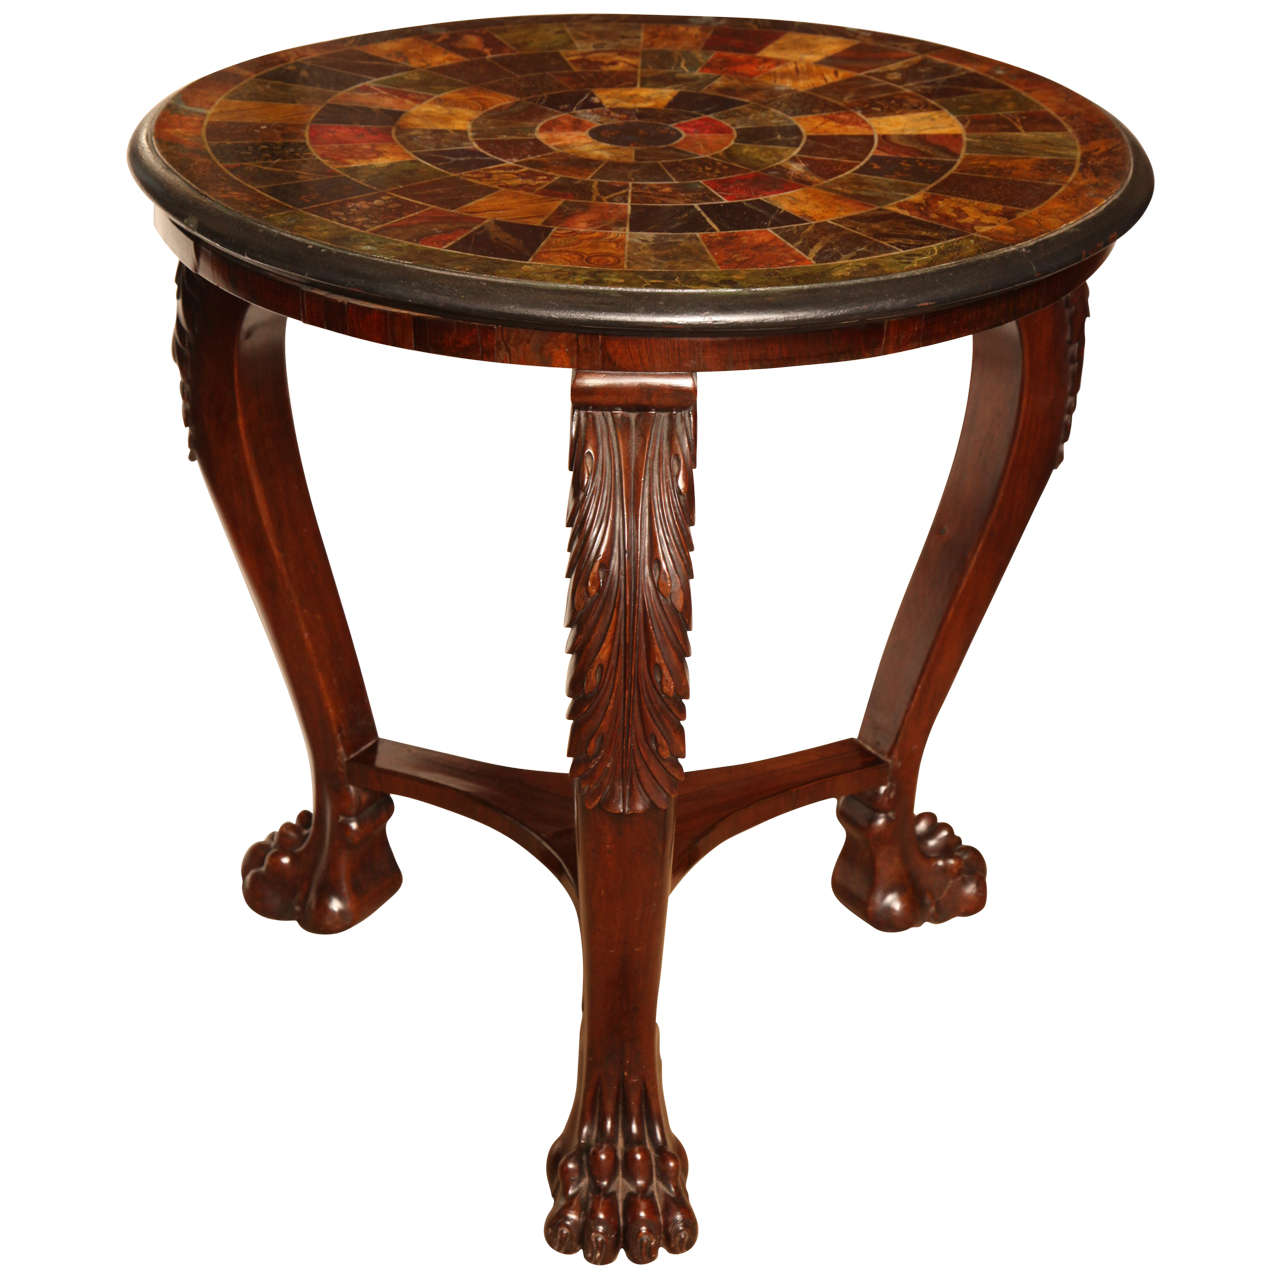 Early 19th Century English Regency Table with Faux Specimen Marble Top For Sale